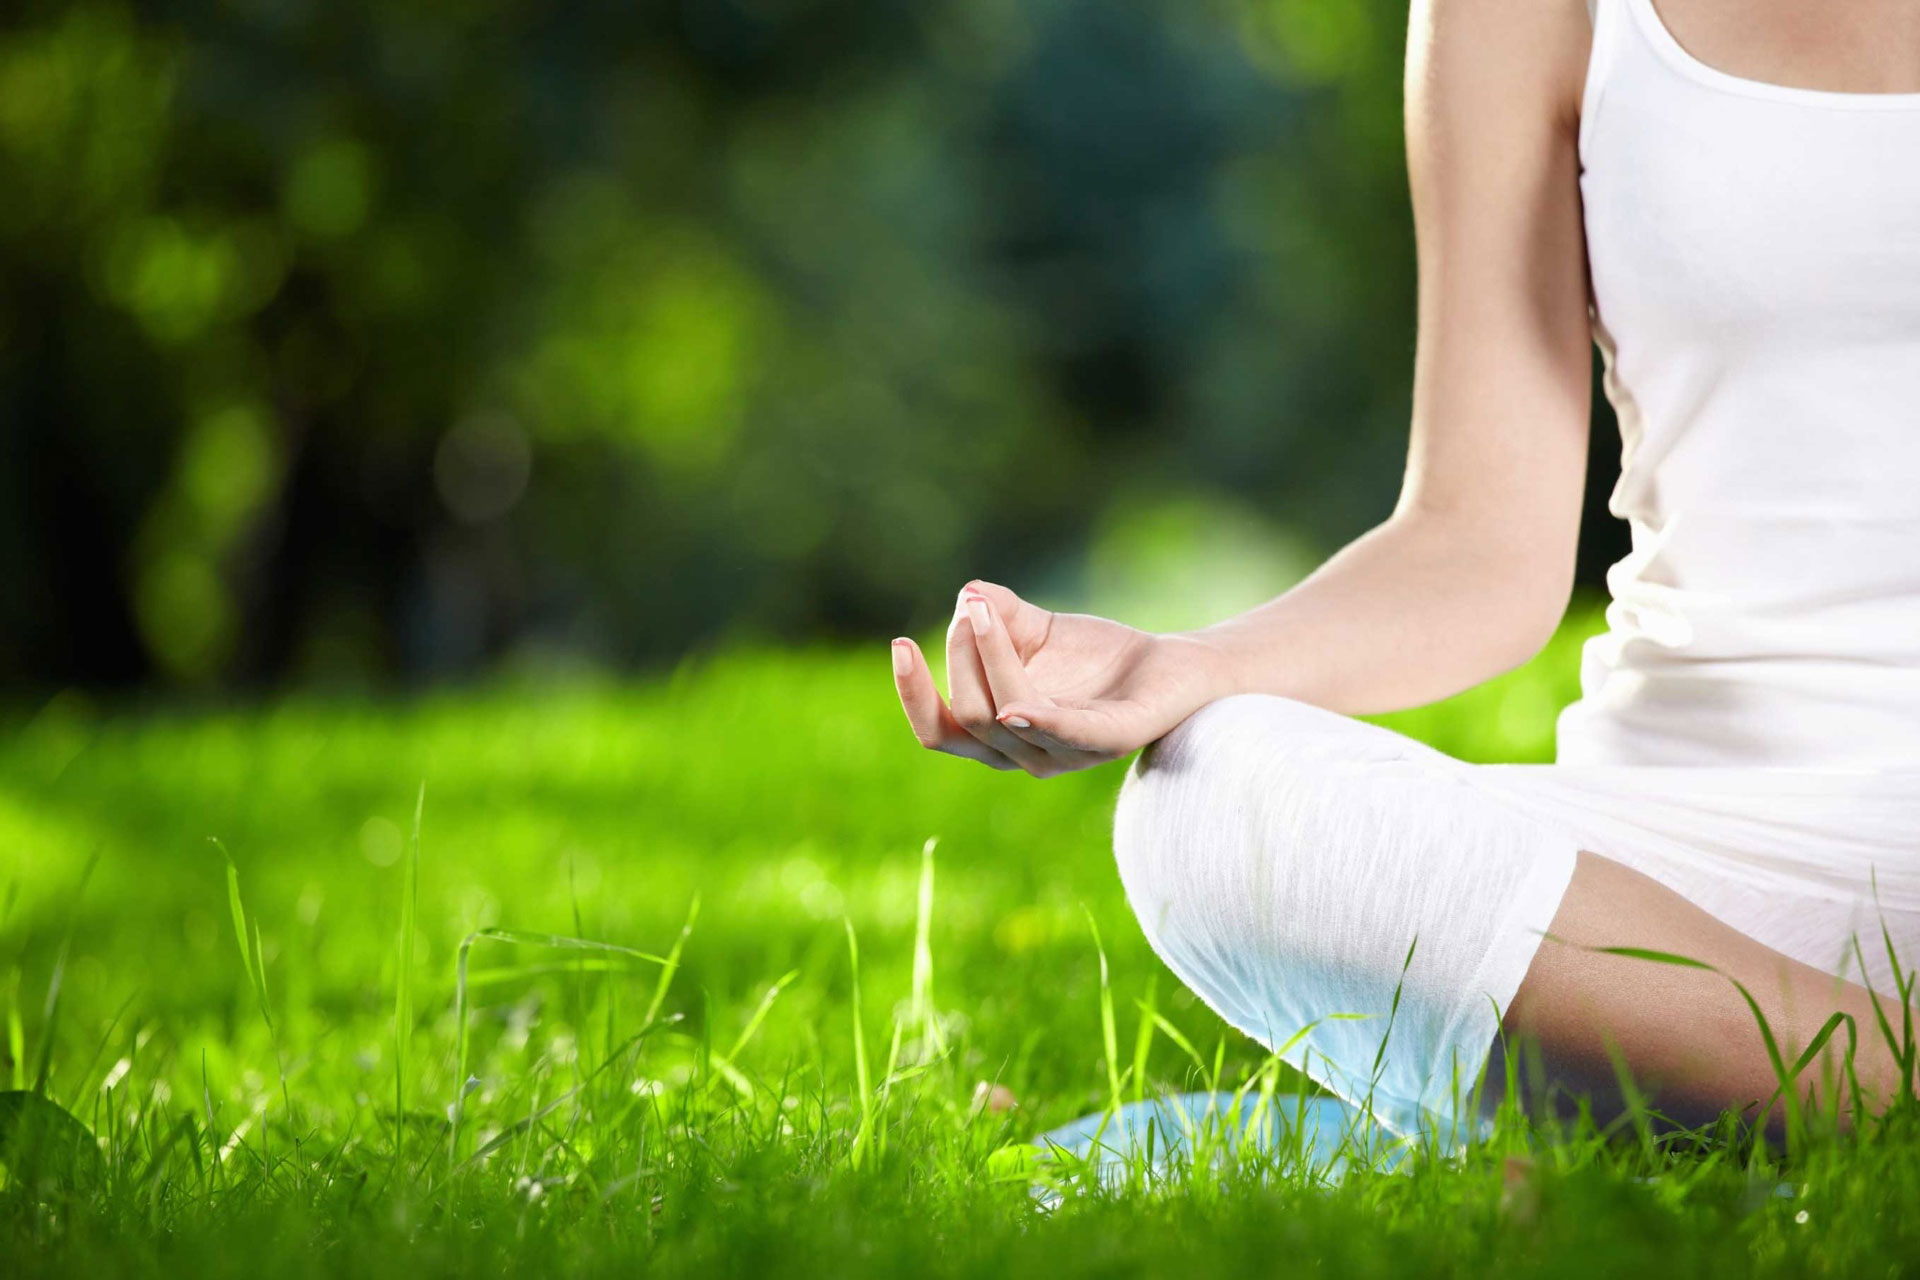 What Naturopathic Principles Are Used in Yoga?